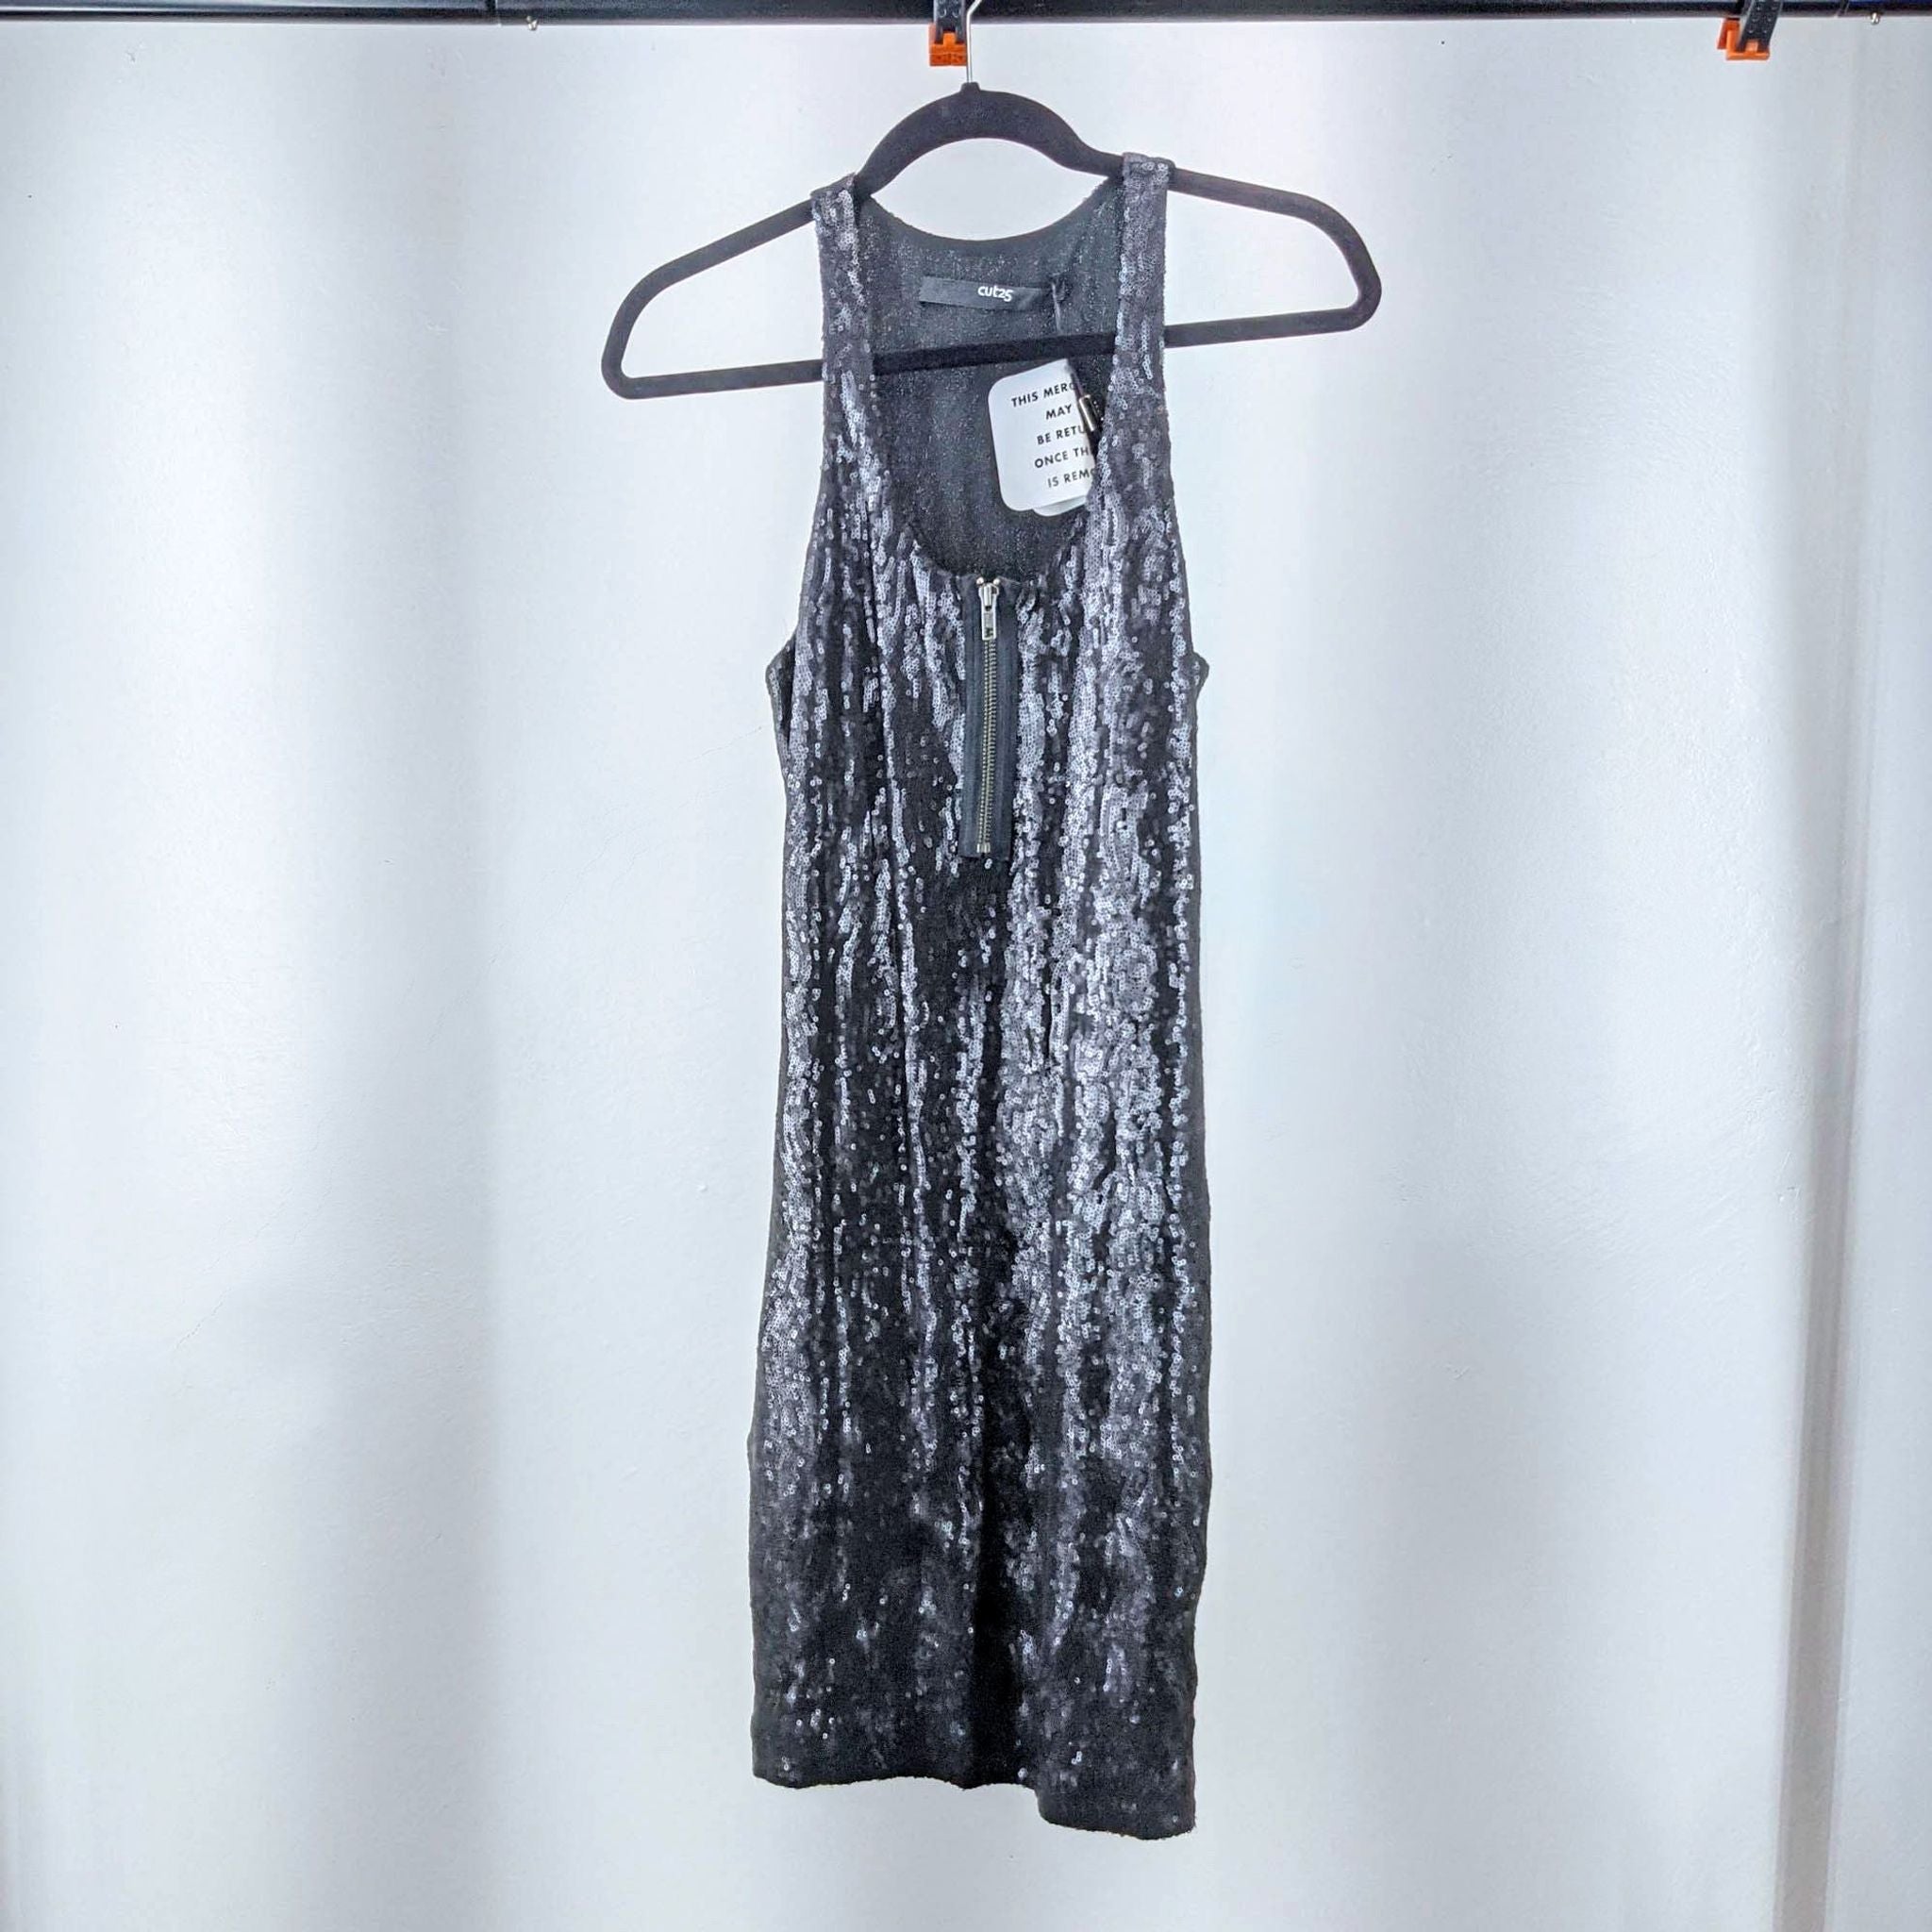 Cut25 by Yigal Azrouel sequined tank dress displayed on hanger, front view.